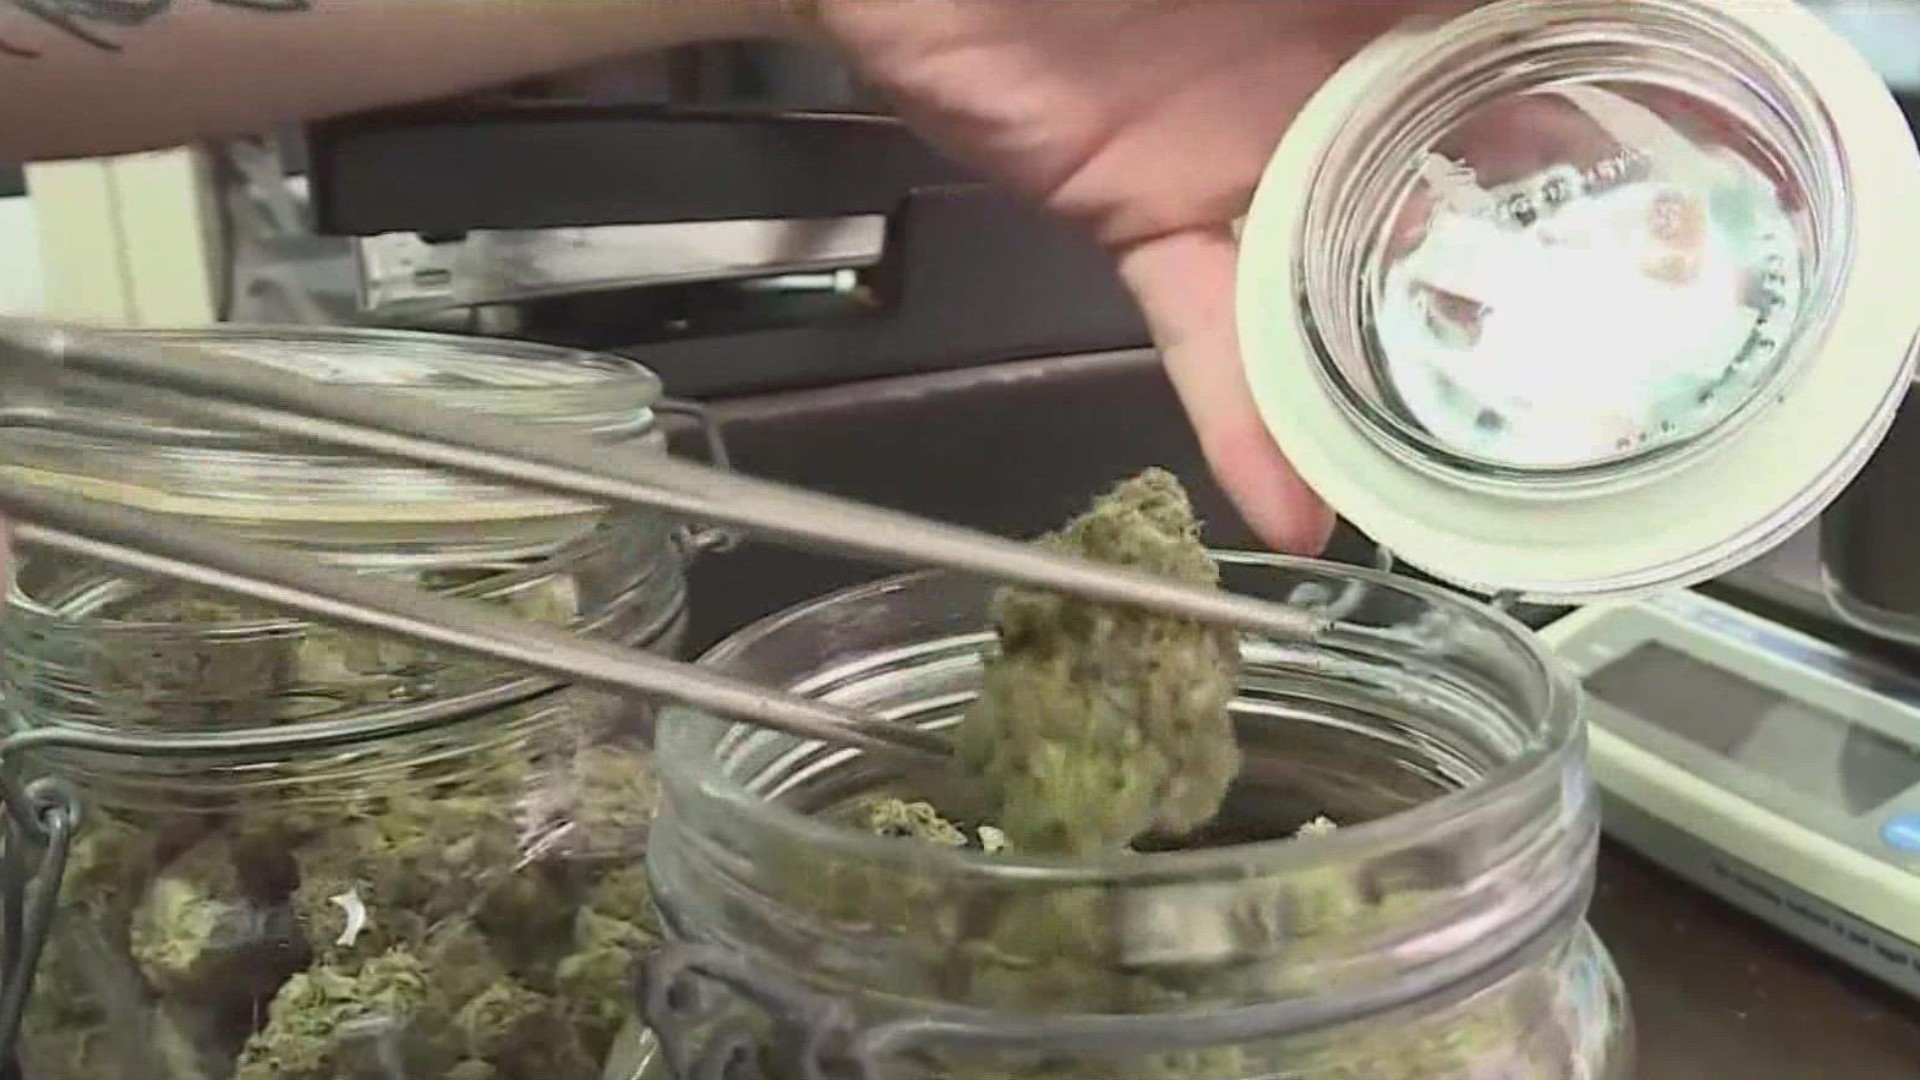 Voters in Oklahoma are one step closer to getting recreational marijuana on the ballot.